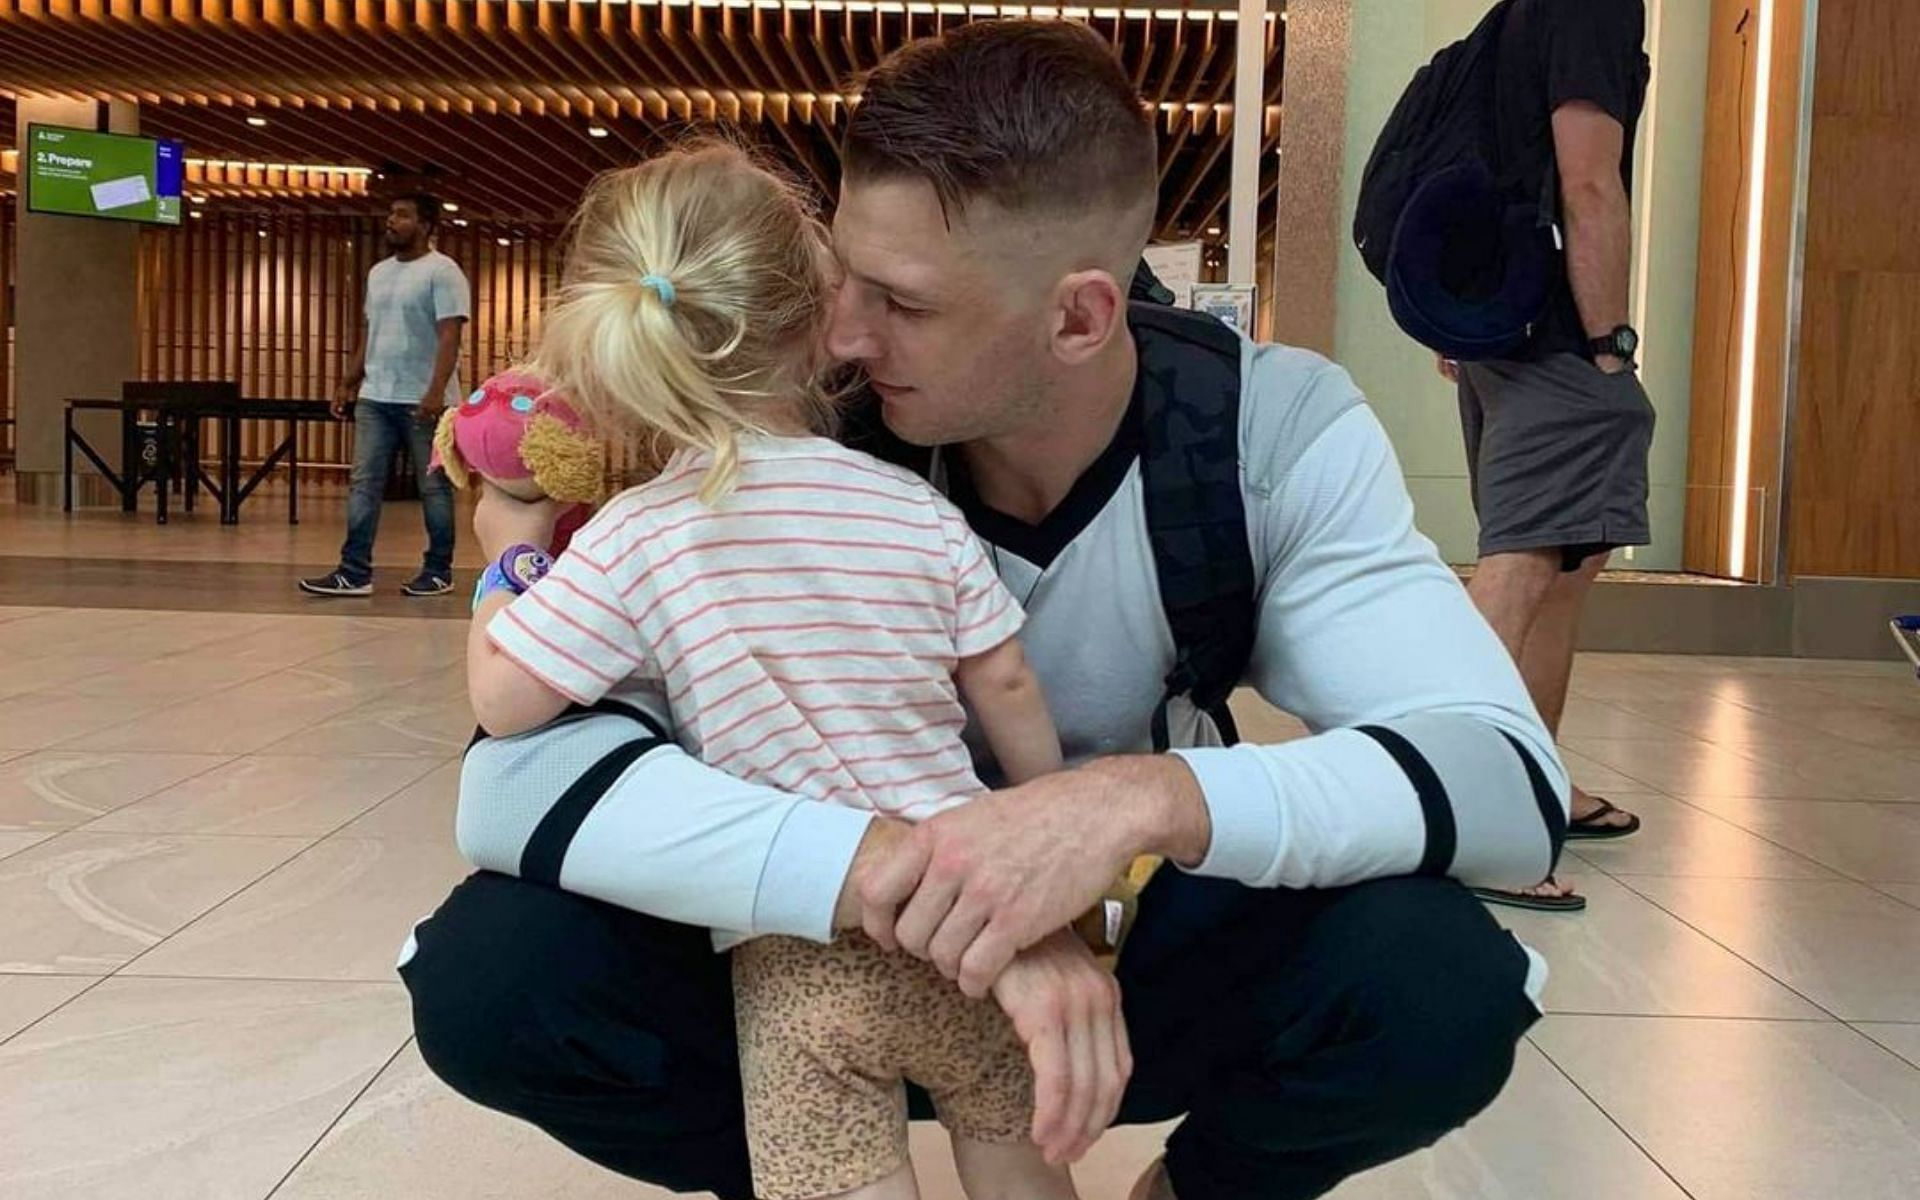 Dan Hooker discussed making up for lost family time ahead of UFC 267 [Image Courtesy: @danhangman on Instag